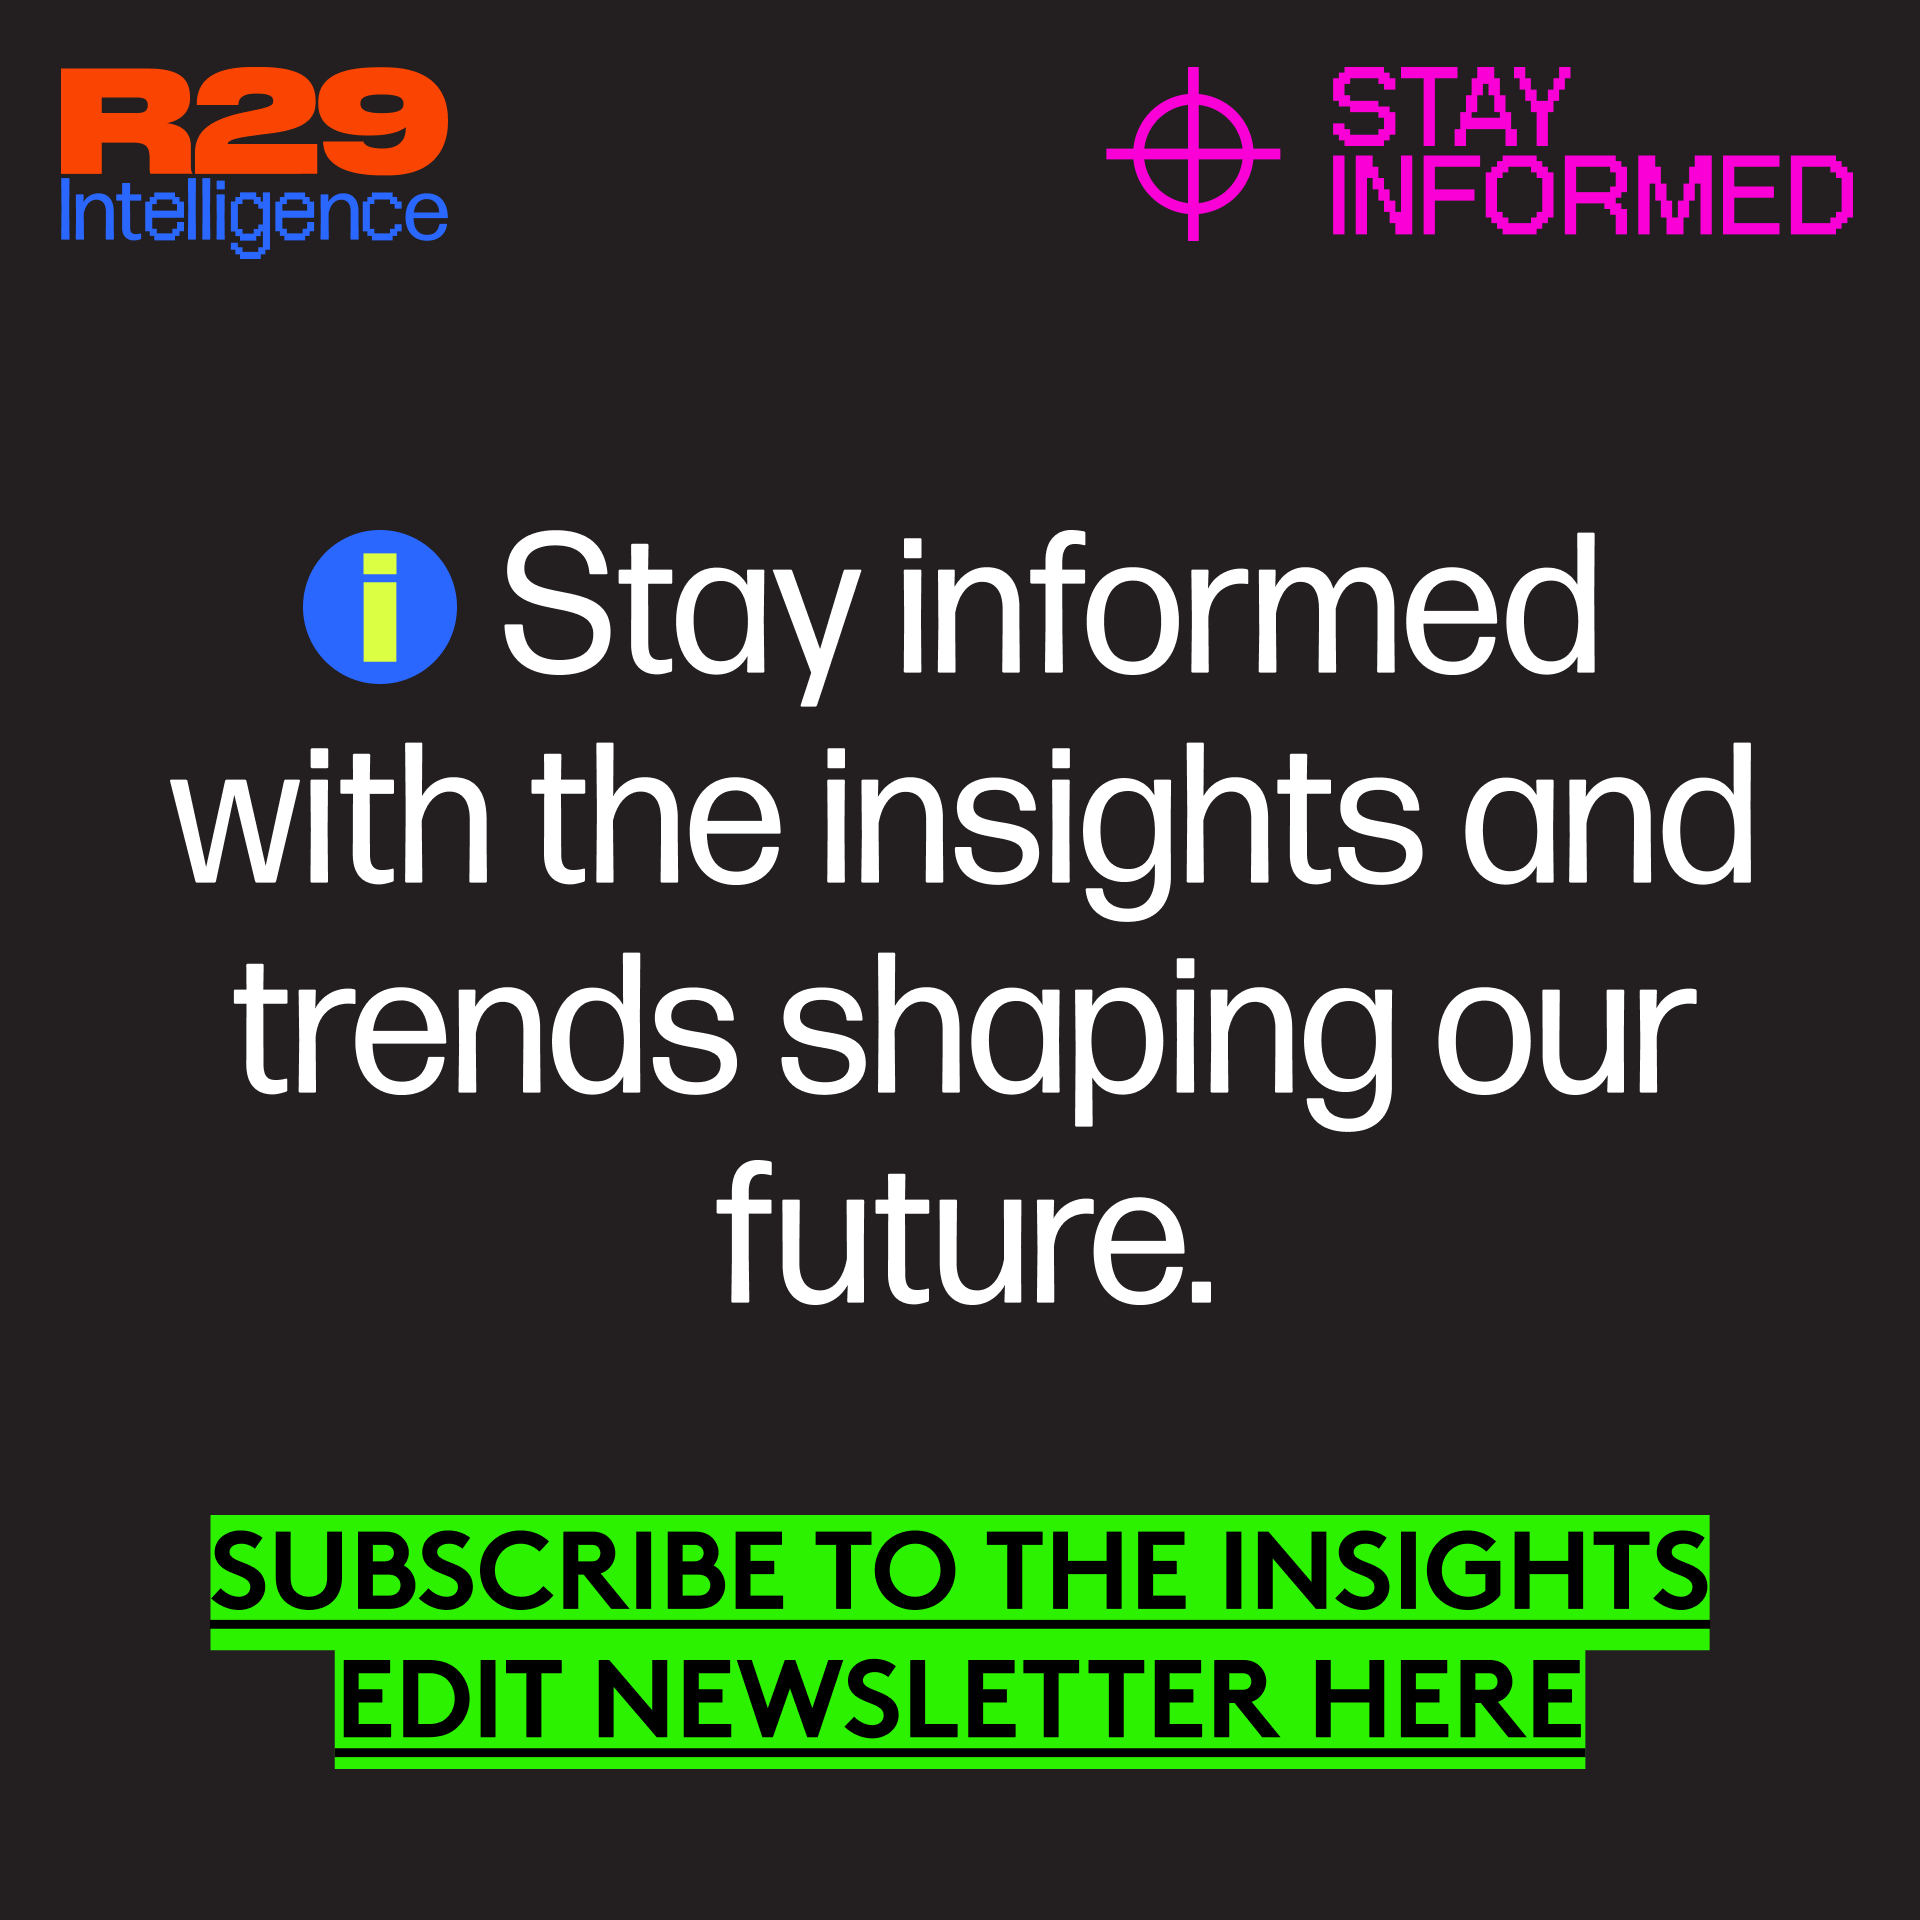 R29 Intelligence. Stay Informed. (i) Stay informed with the insights and trends shaping our future. Subscribe to the Insights Edit Newsletter here.